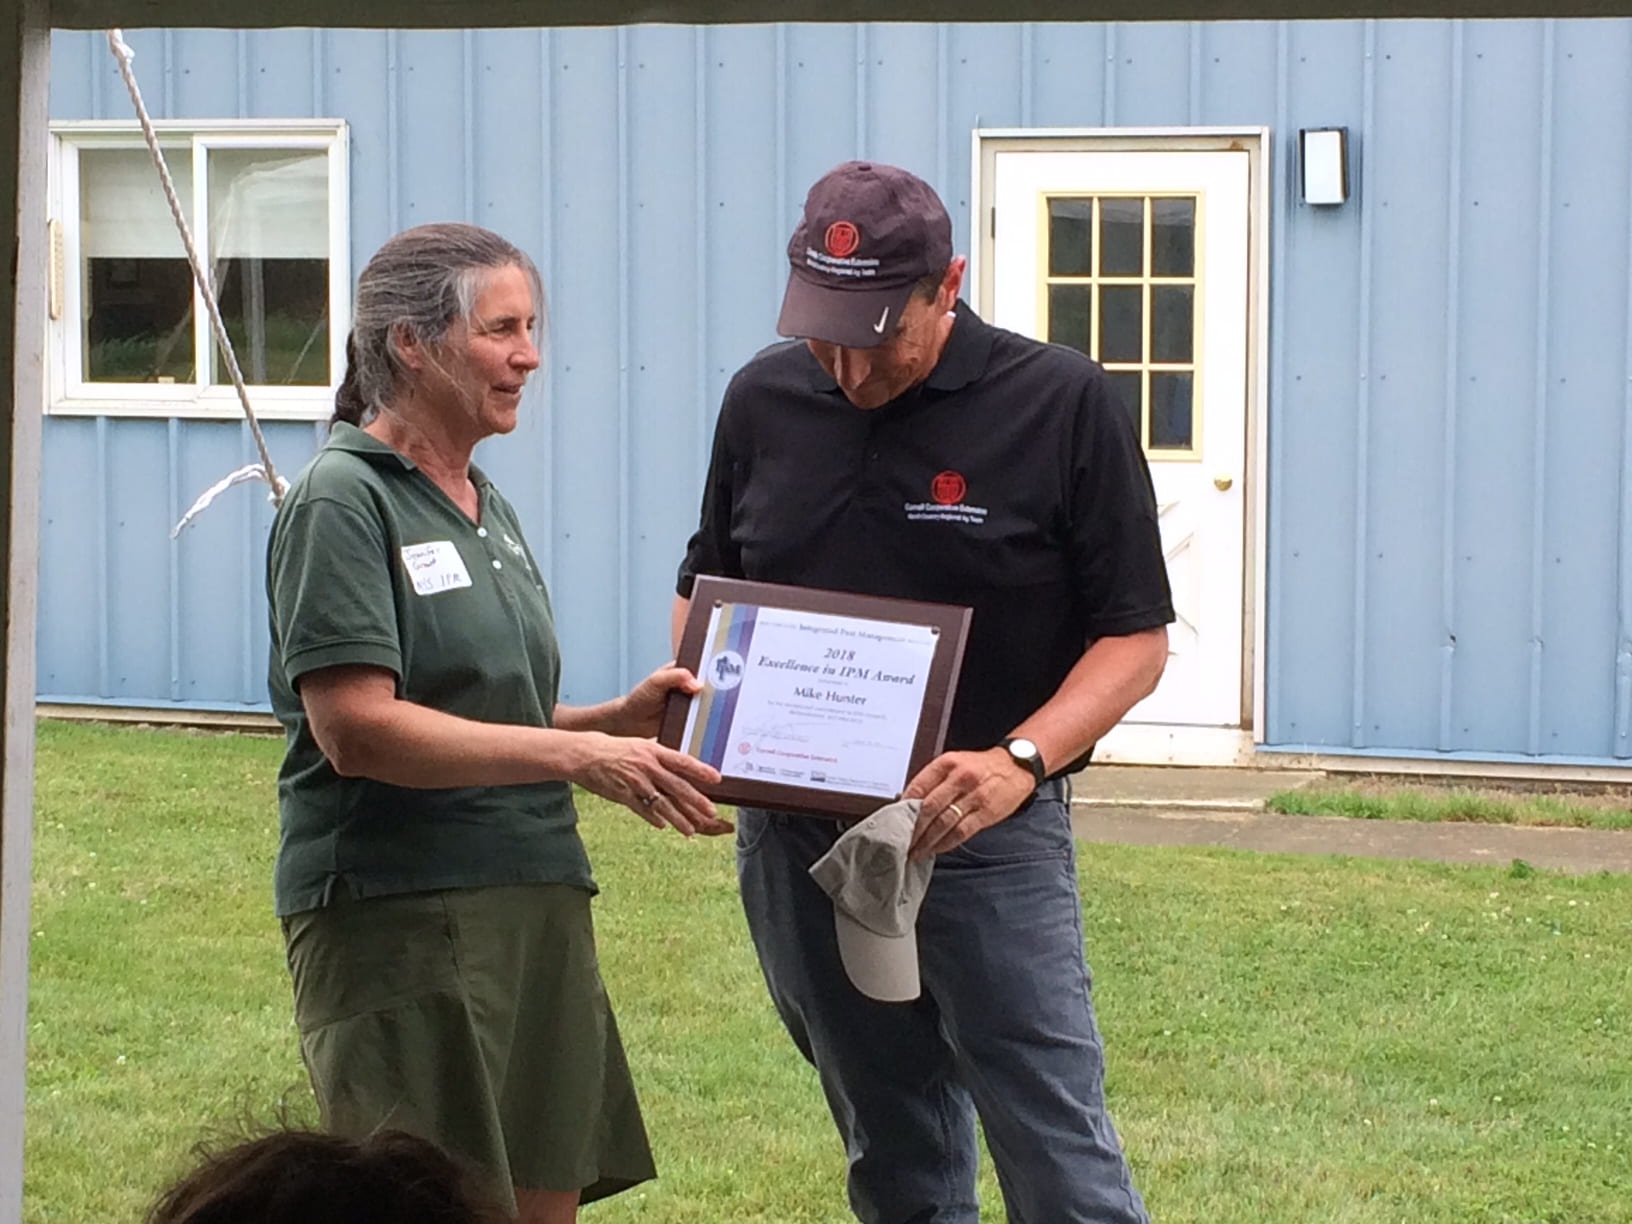 Photo shows Dr. Jennifer Grant awarding a plaque to Mike Hunter for his Excellence in IPM Award.